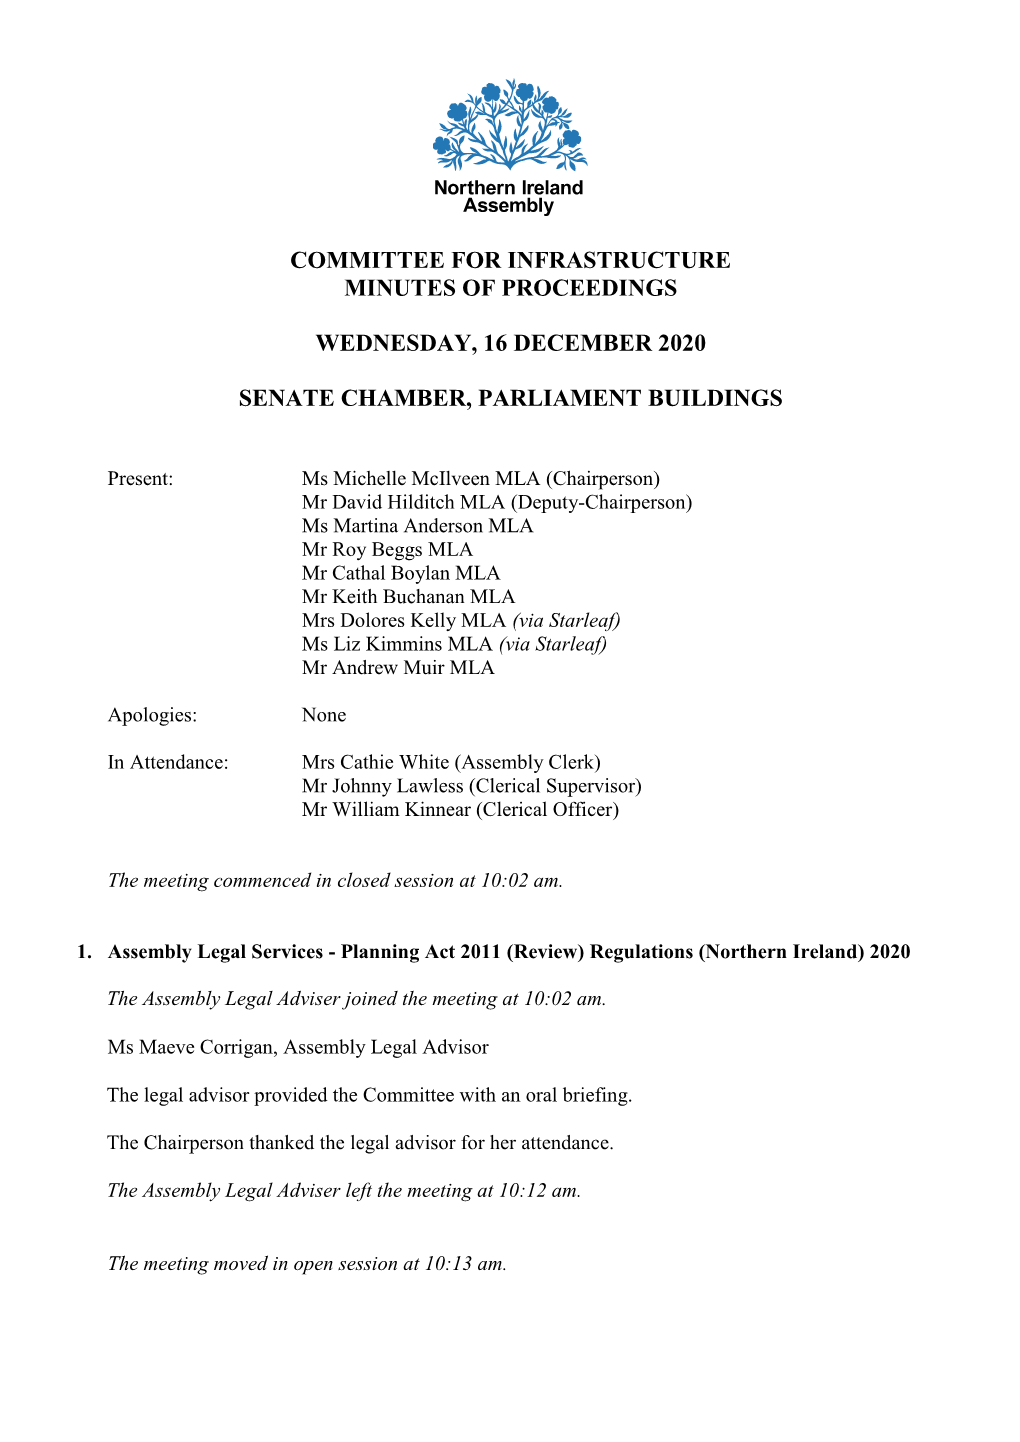 Committee for Infrastructure Meeting Minutes of Proceedings